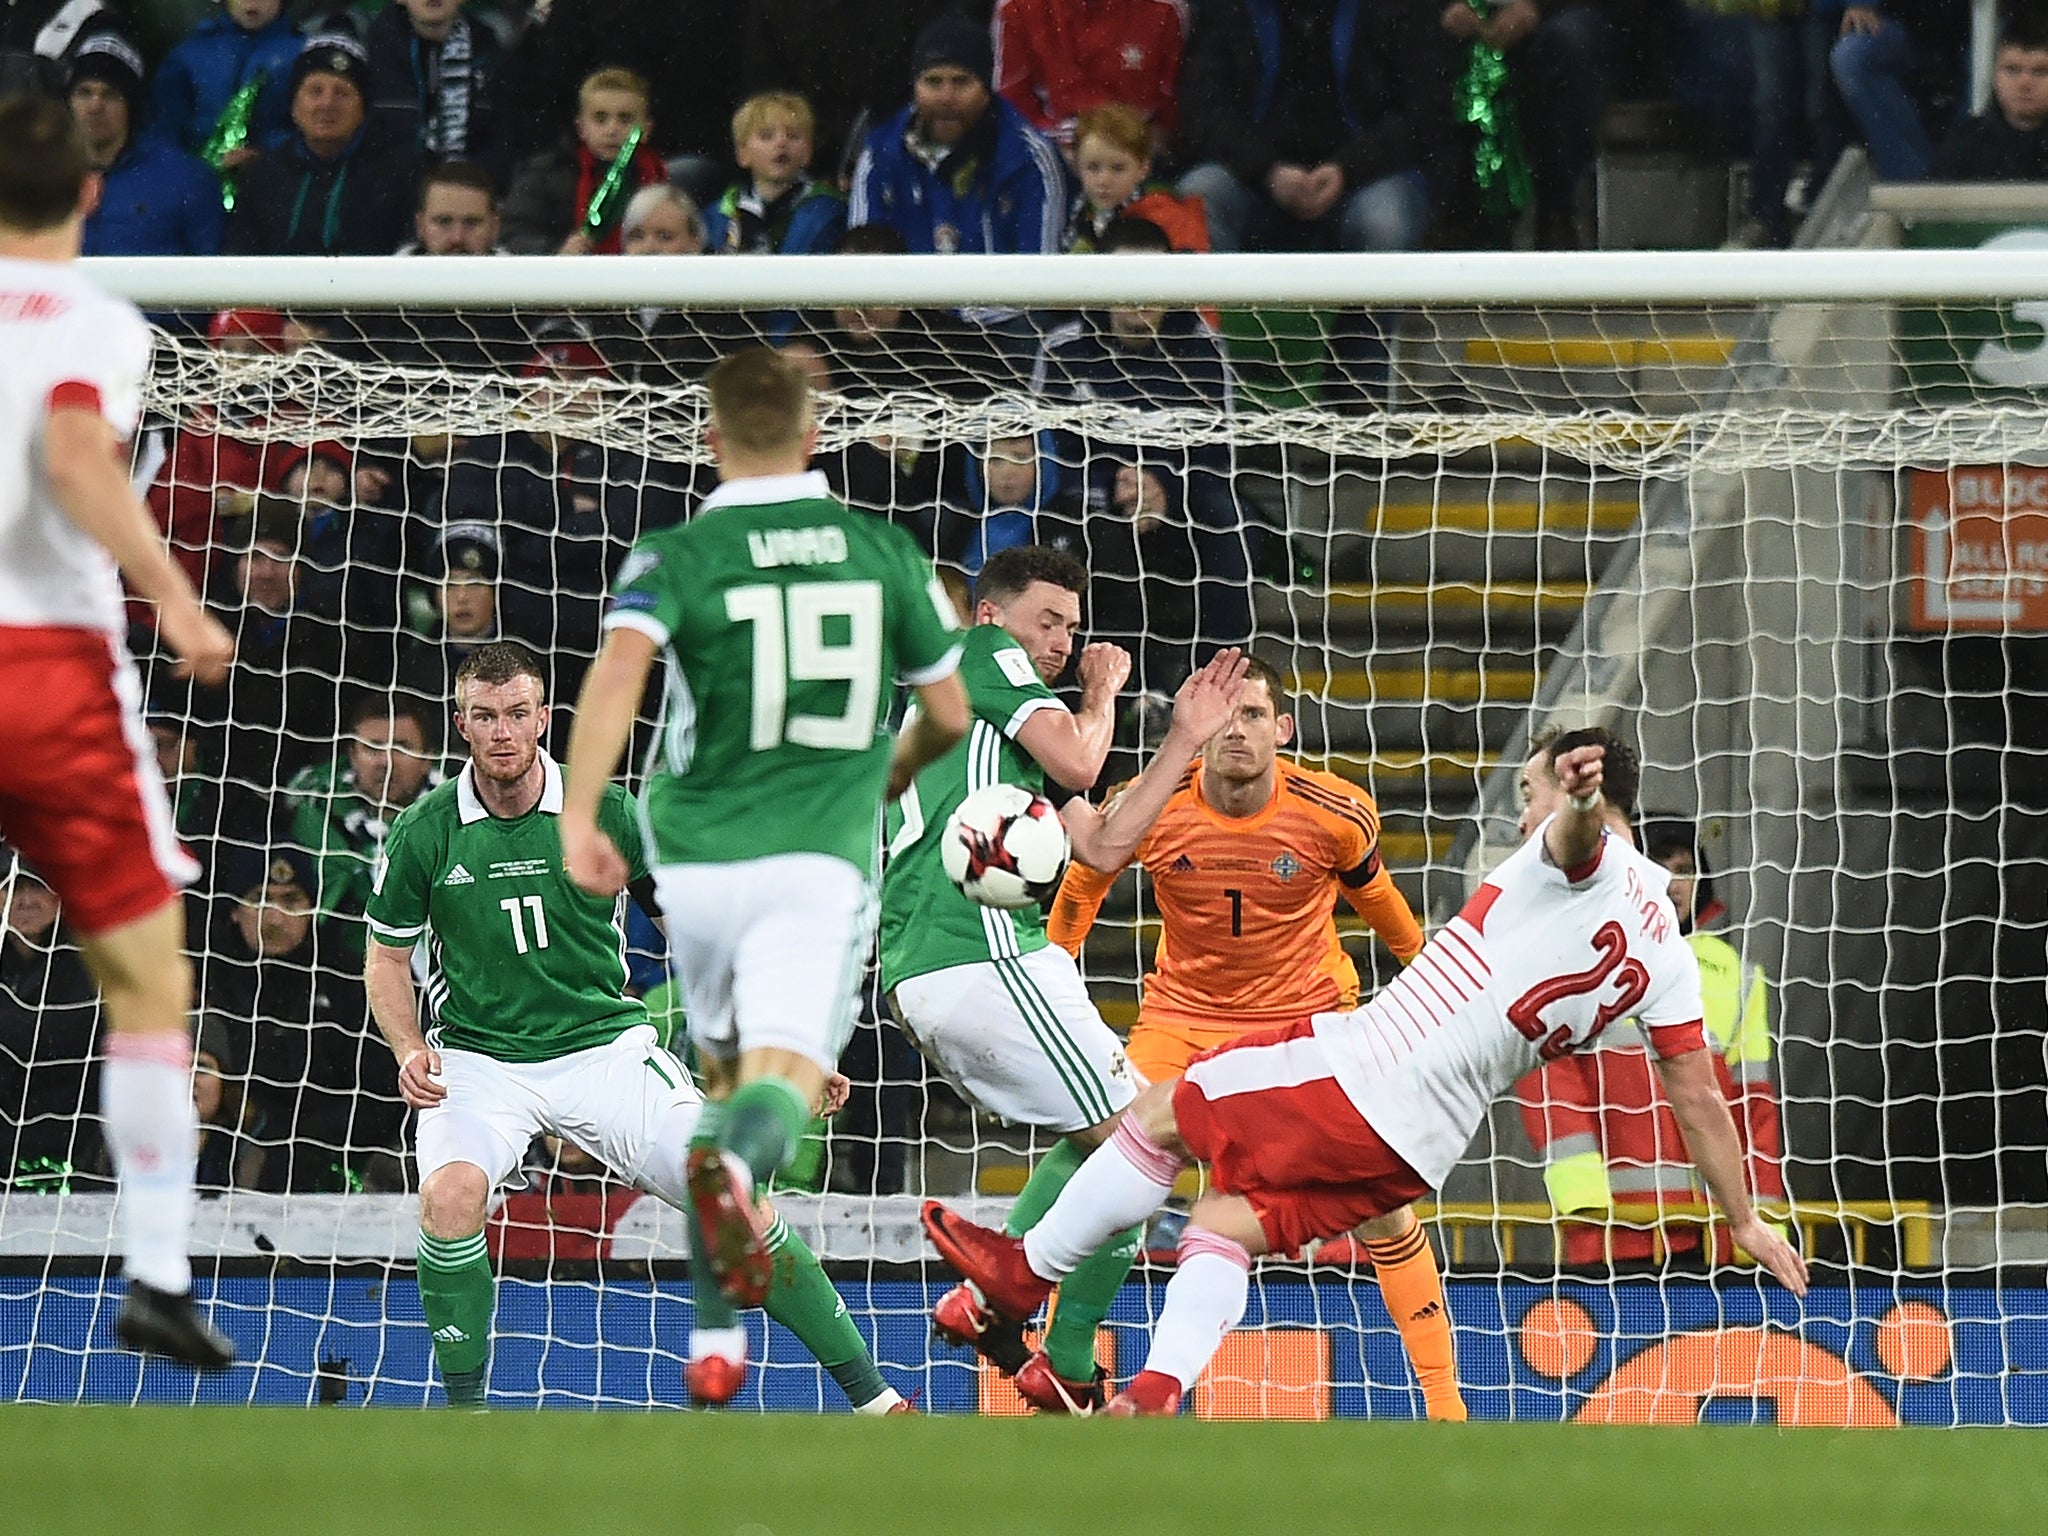 Xherdan Shaqiri's shot hits Corry Evans and leads to a penalty for Switzerland against Northern Ireland